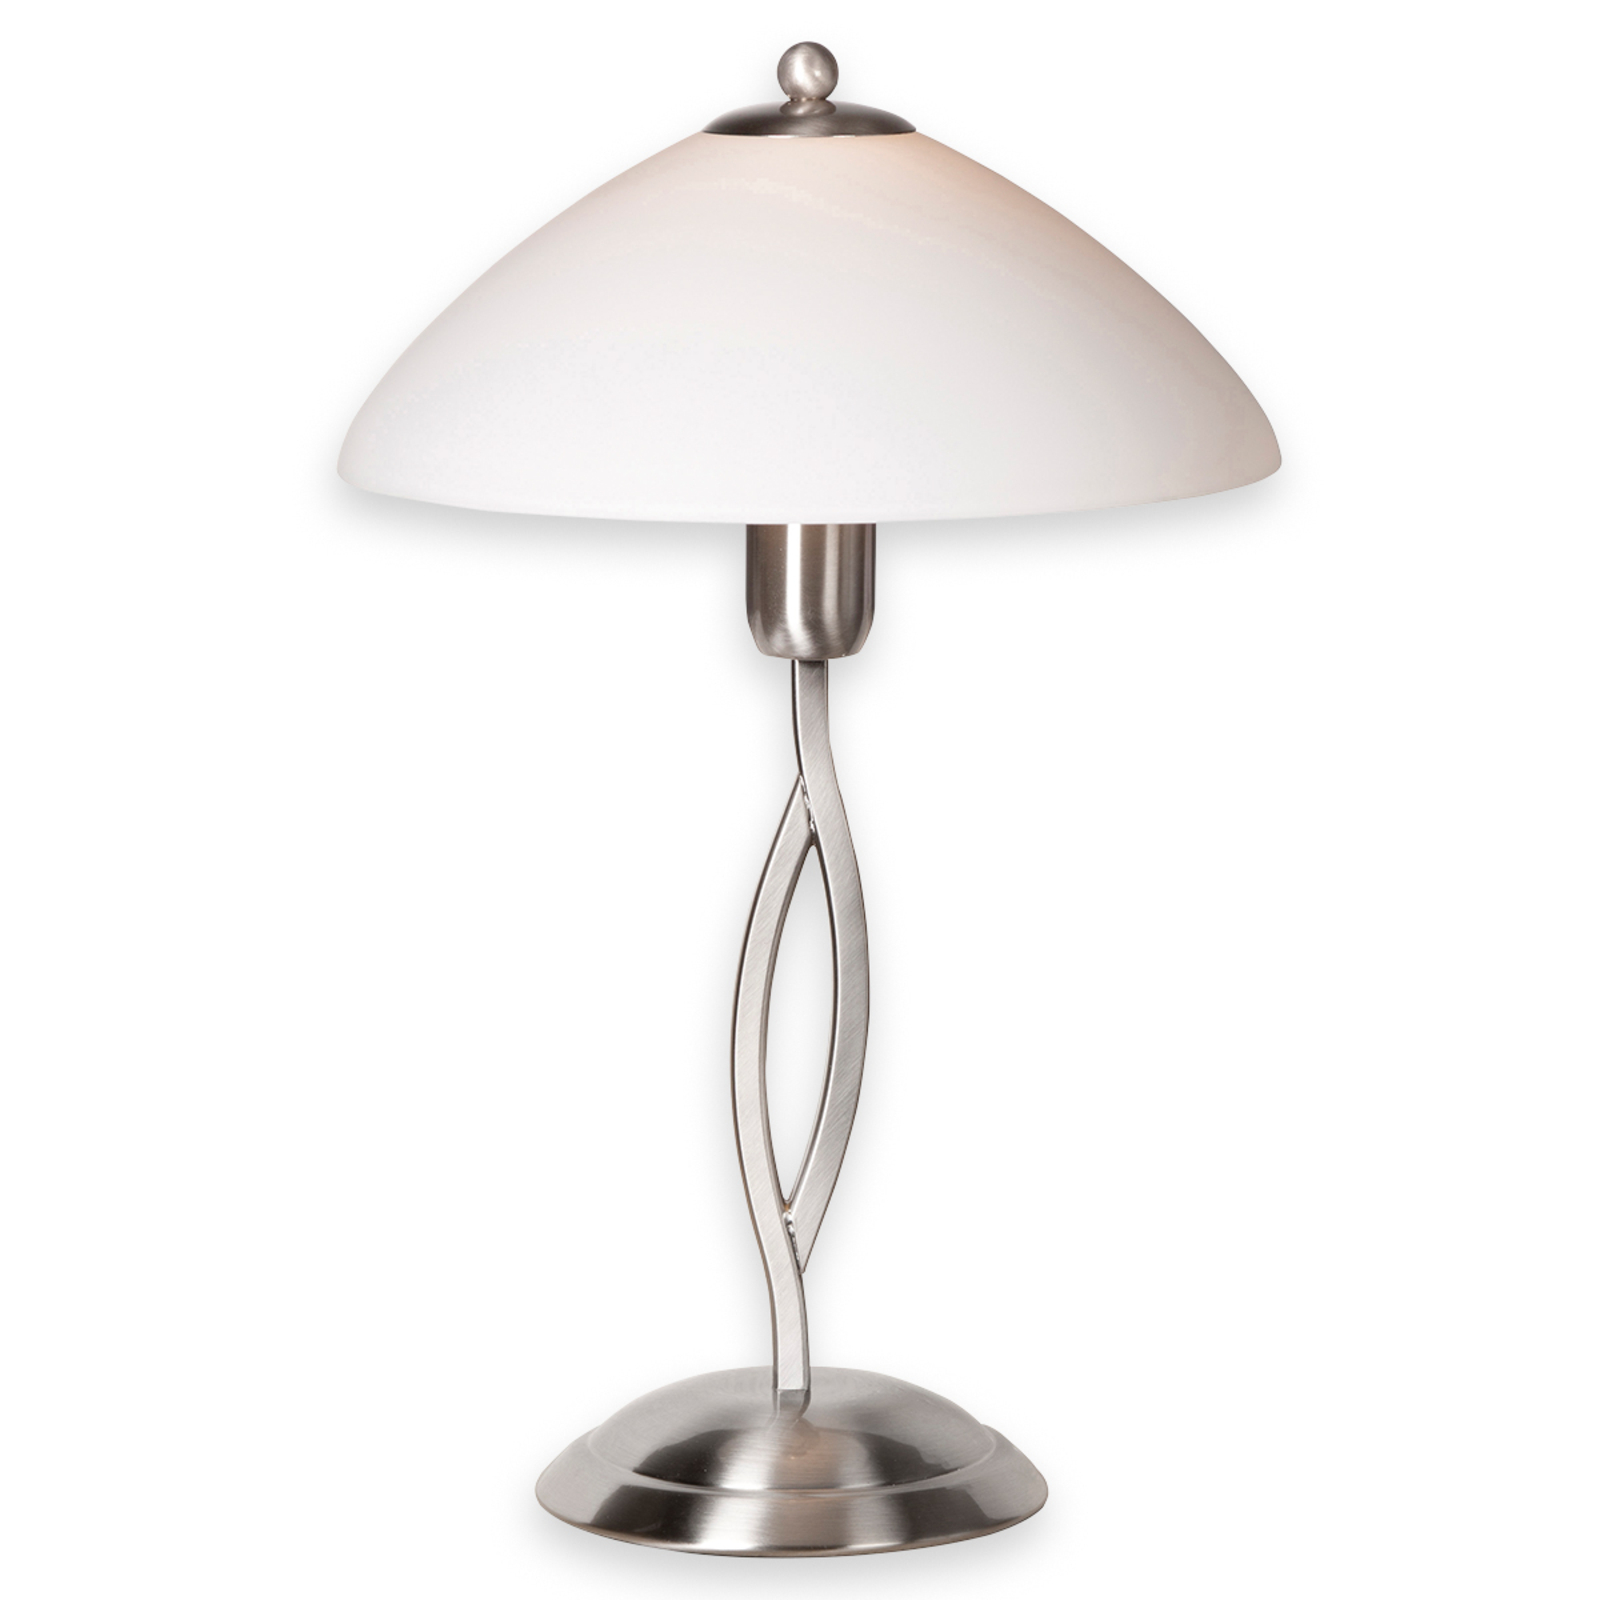 Capri table lamp with a special charm